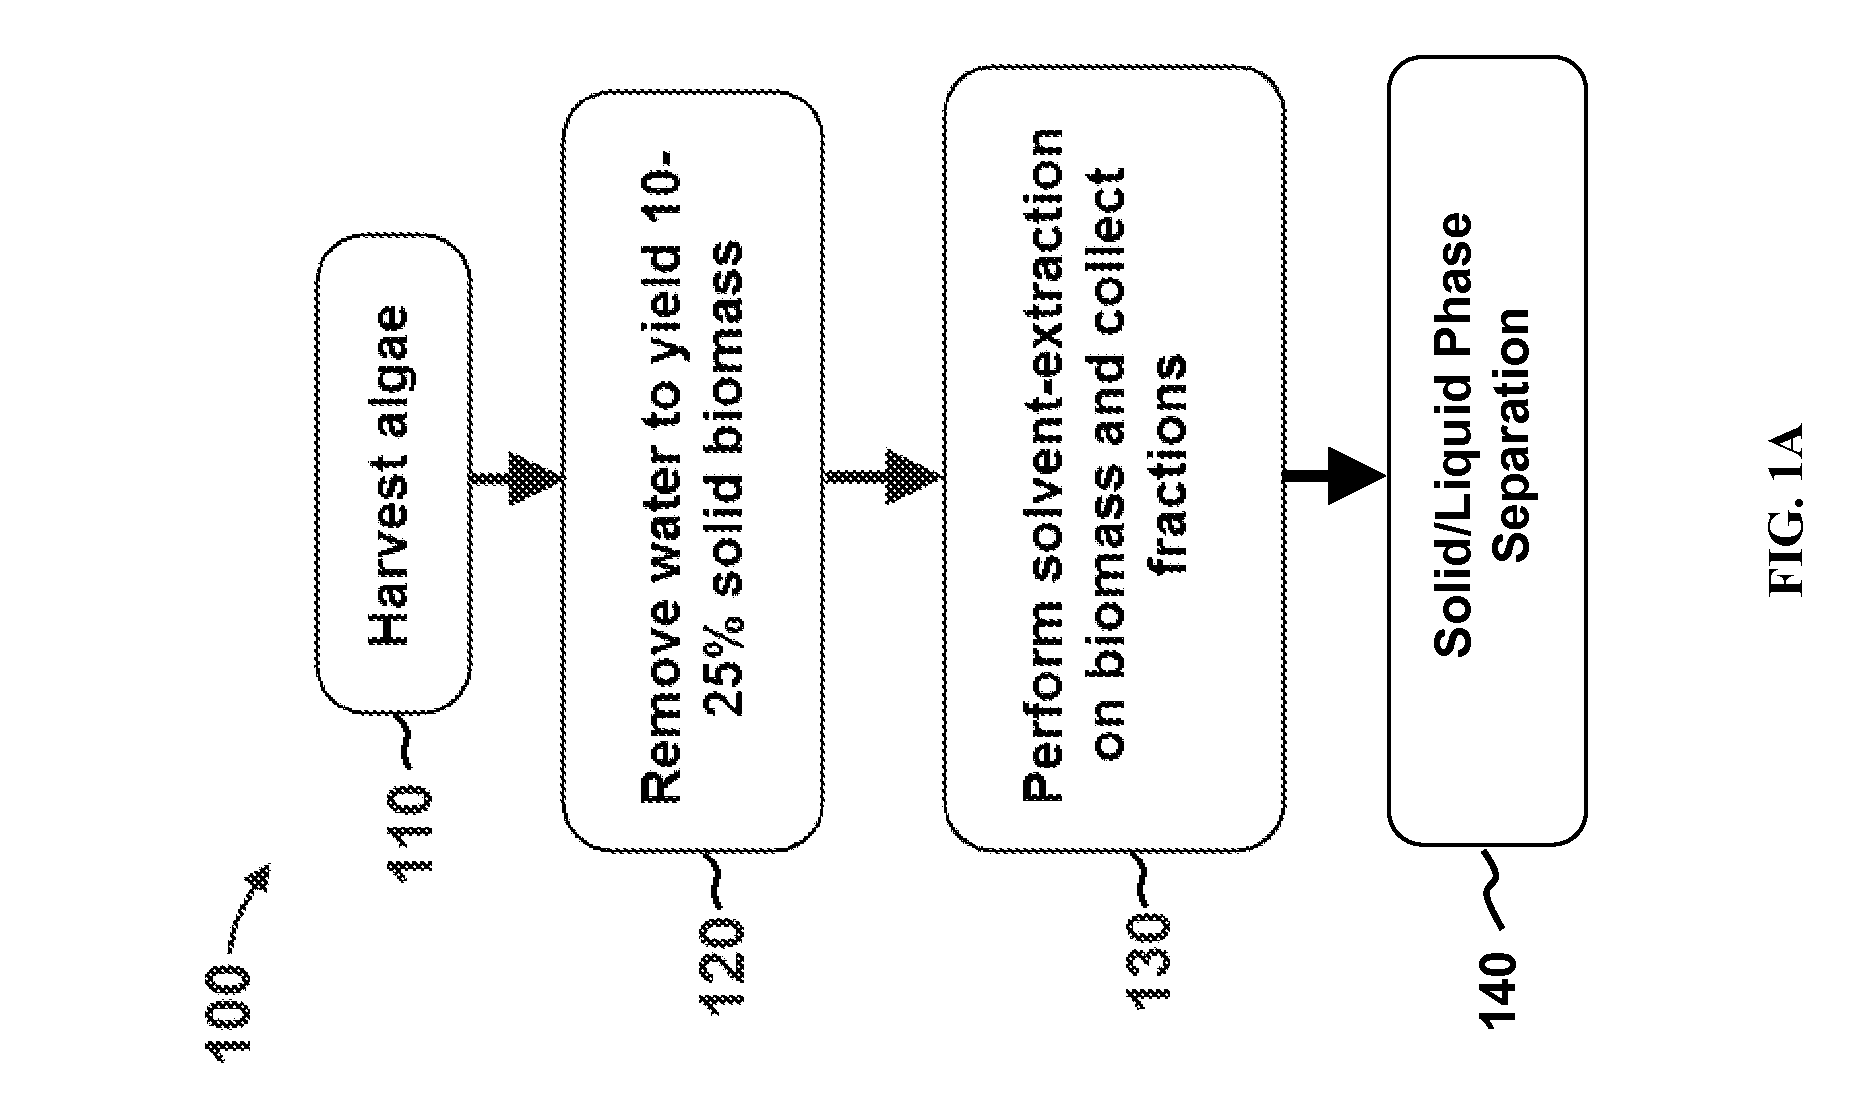 Methods of and Systems for Dewatering Algae and Recycling Water Therefrom